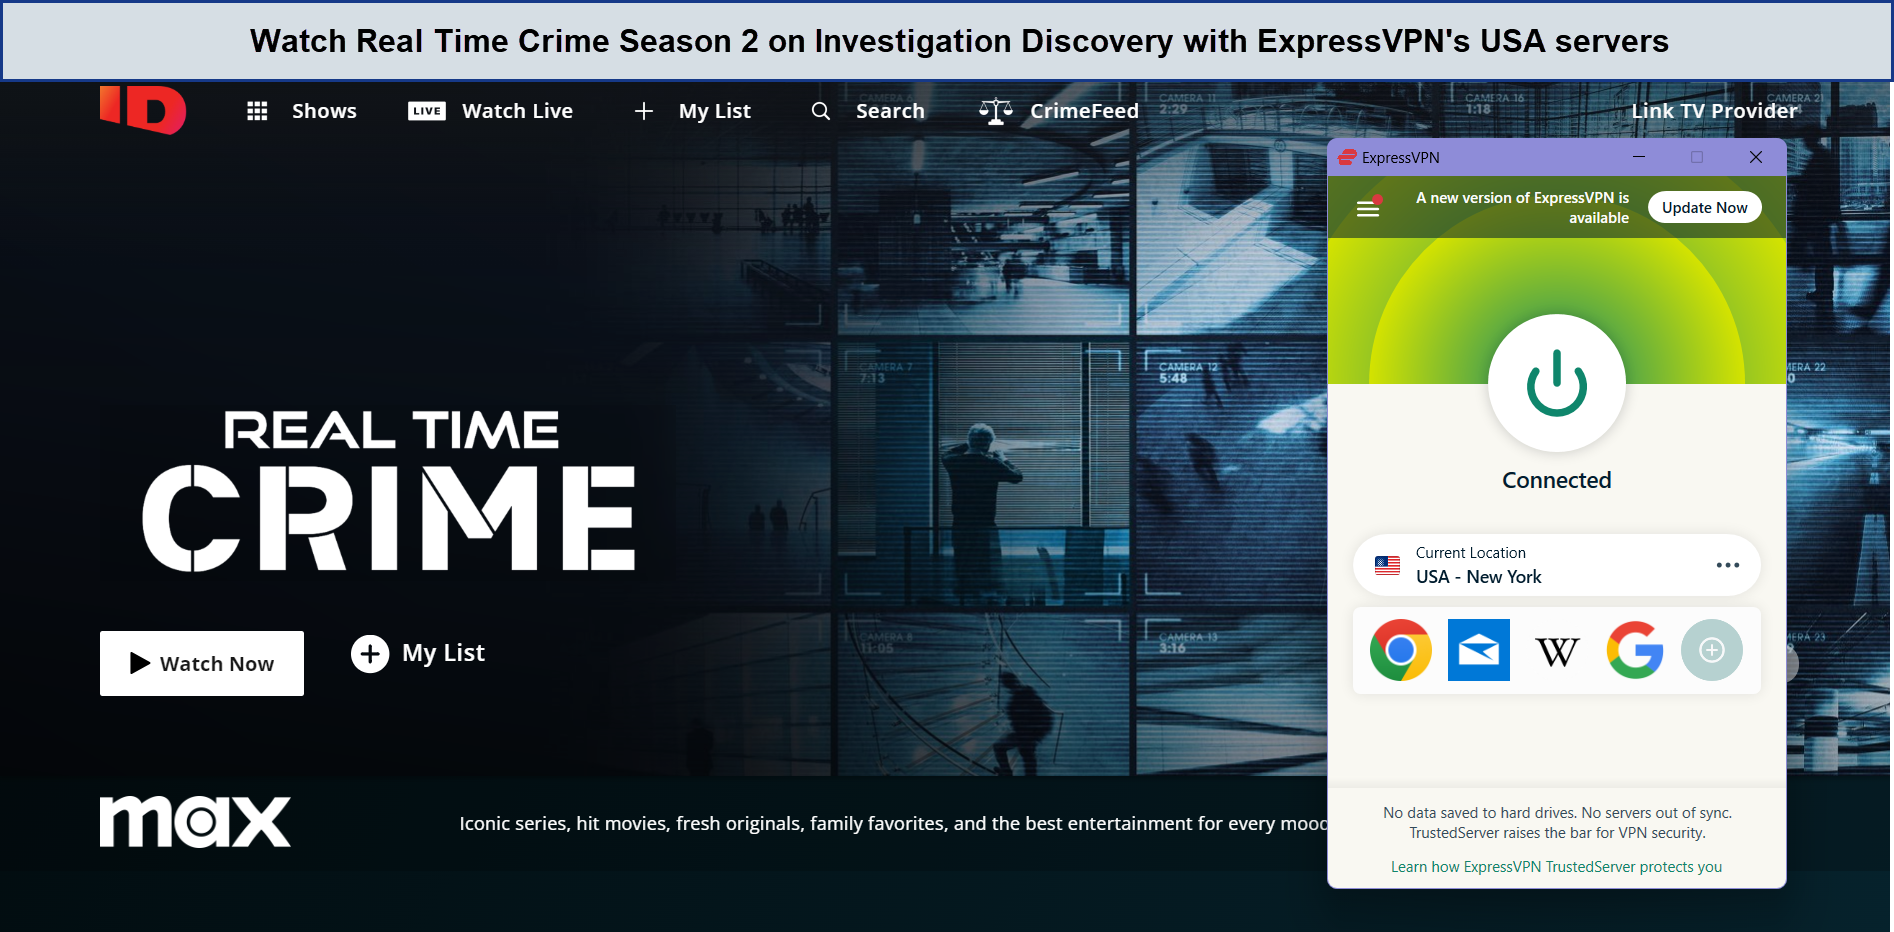 Watch-Real-Time-Crime-on-Investigation-Discovery-with-ExpressVPN-in-Australia